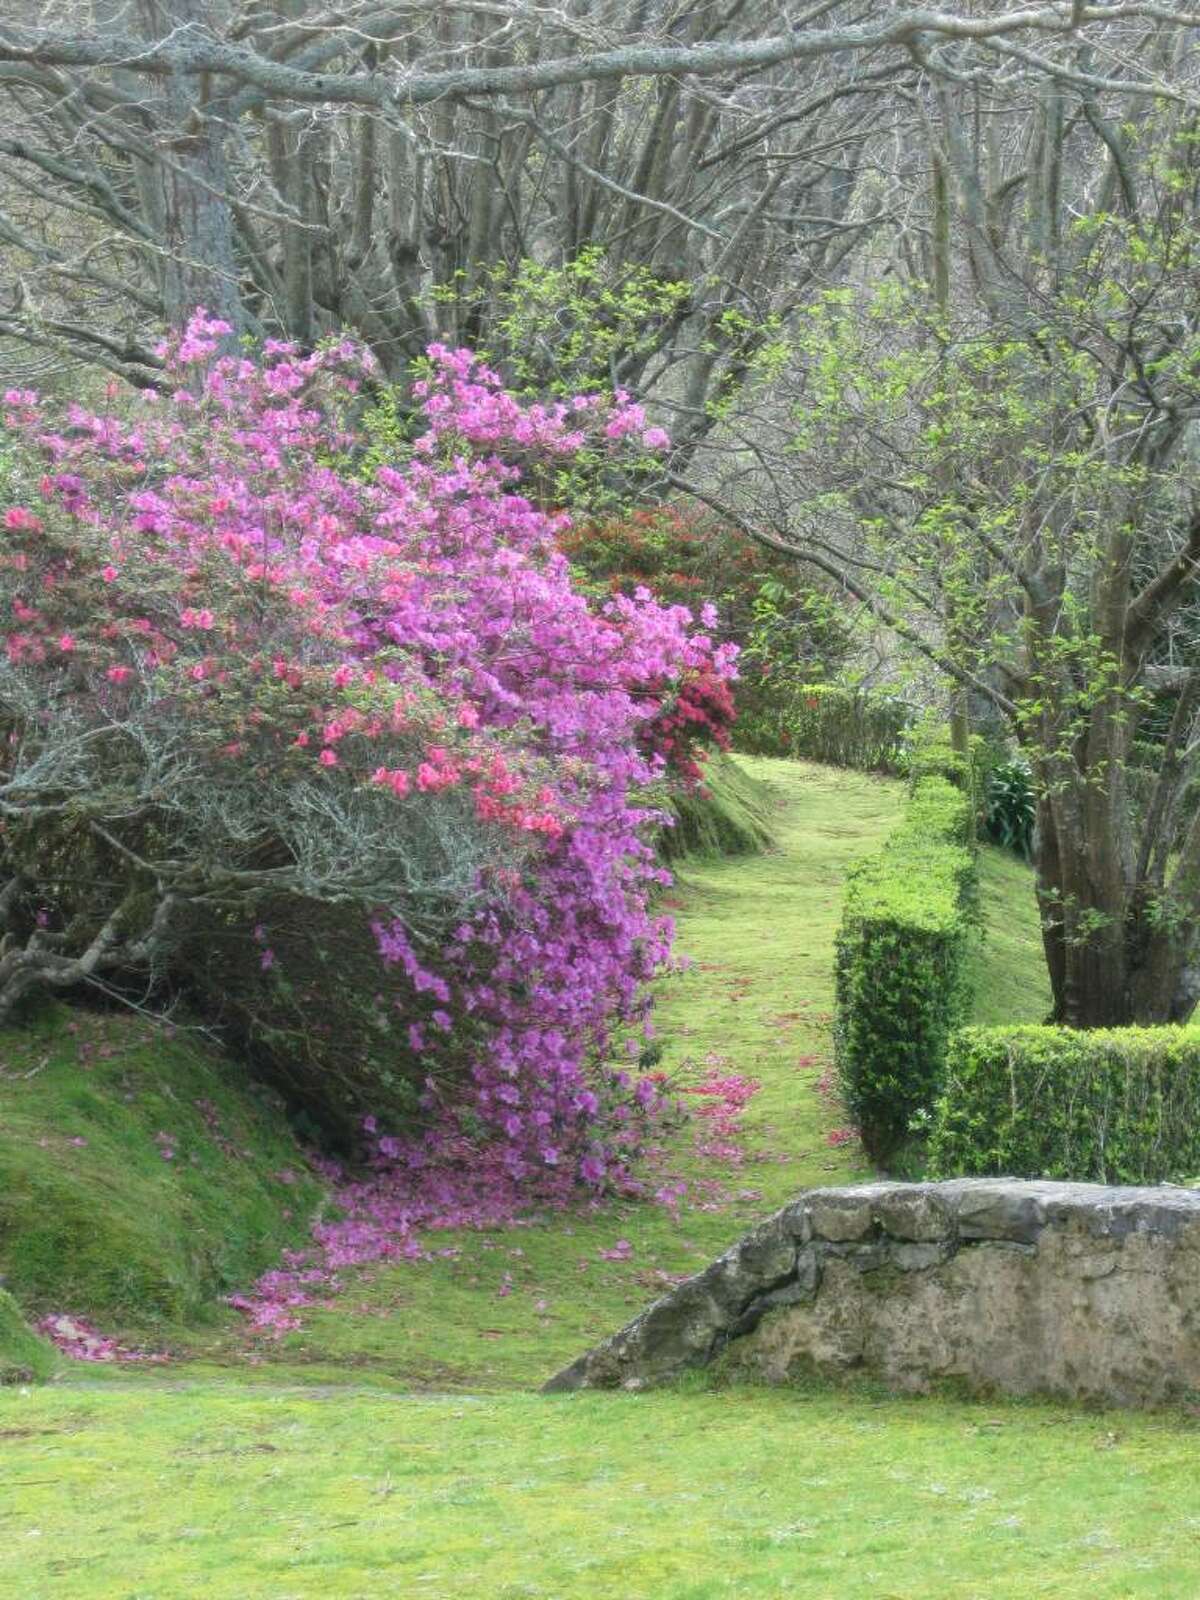 A wall of blooming azaleas along a path is among the garden treasures of the Ch?Porta Formosa tea plantation at Porto Formosa on the rugged north shore of the Azores. (K.D. NORRIS)